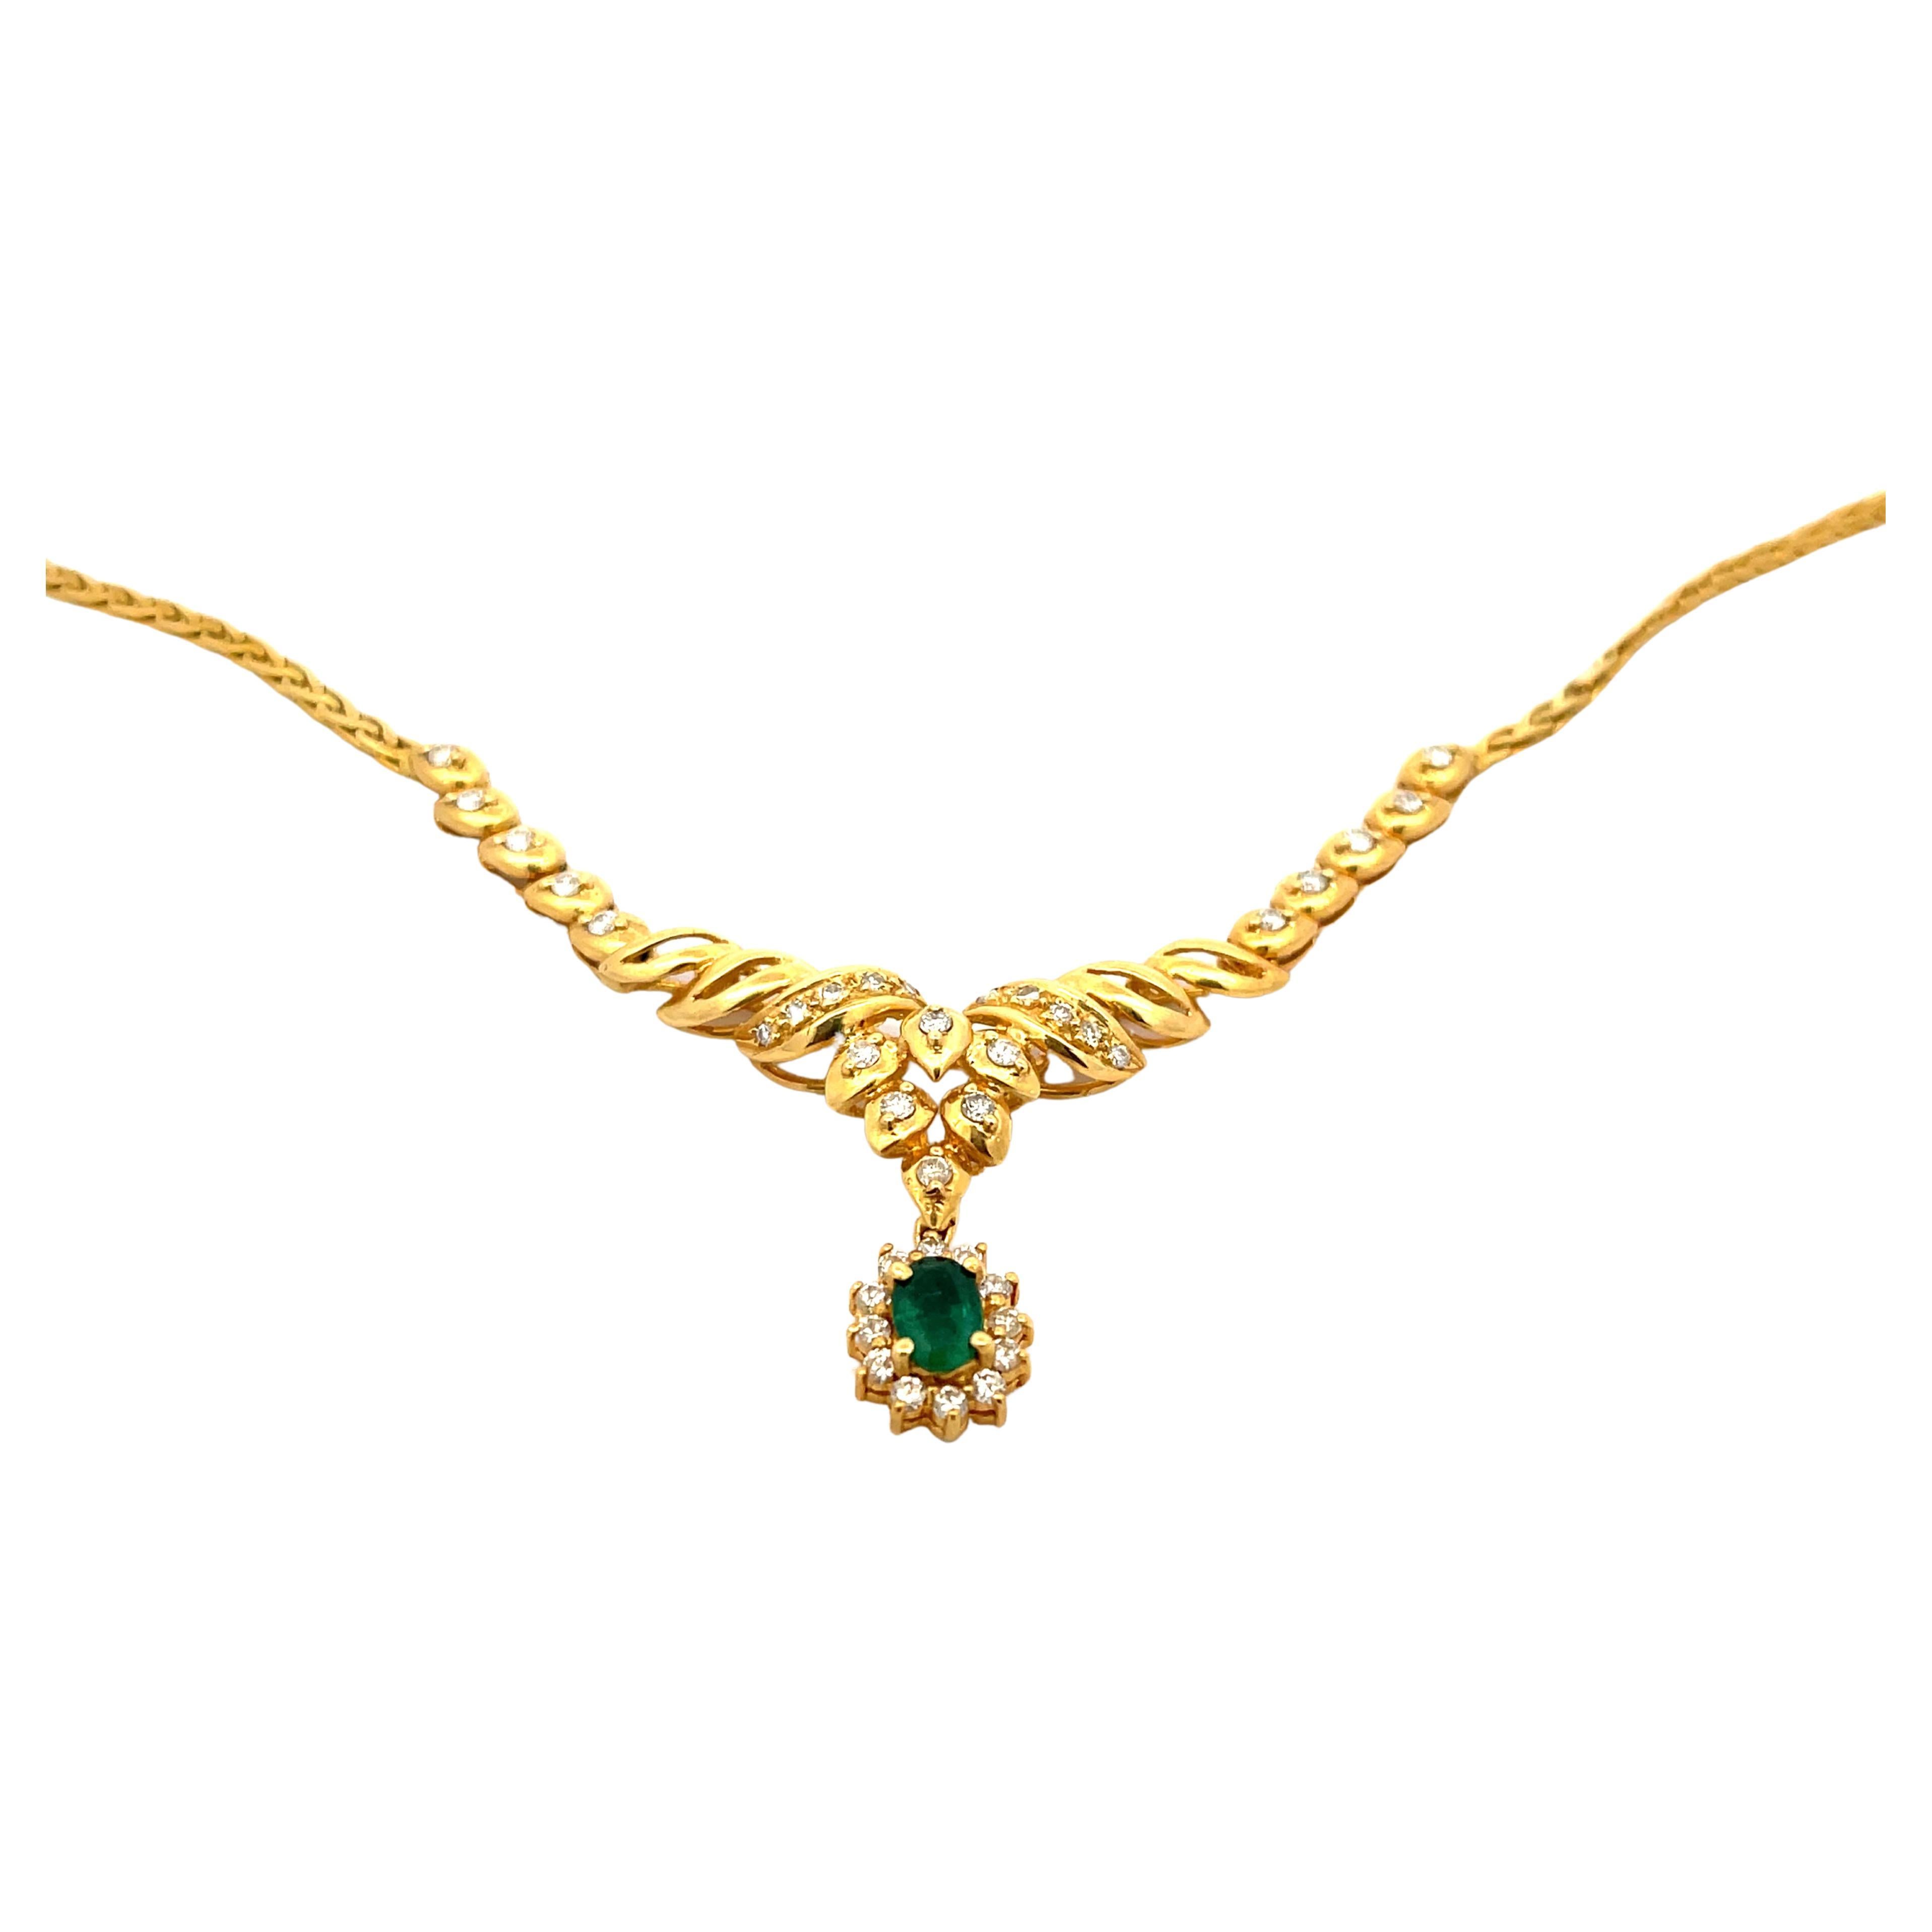 Colombian Emerald & Diamond Necklace in 18k Yellow Gold